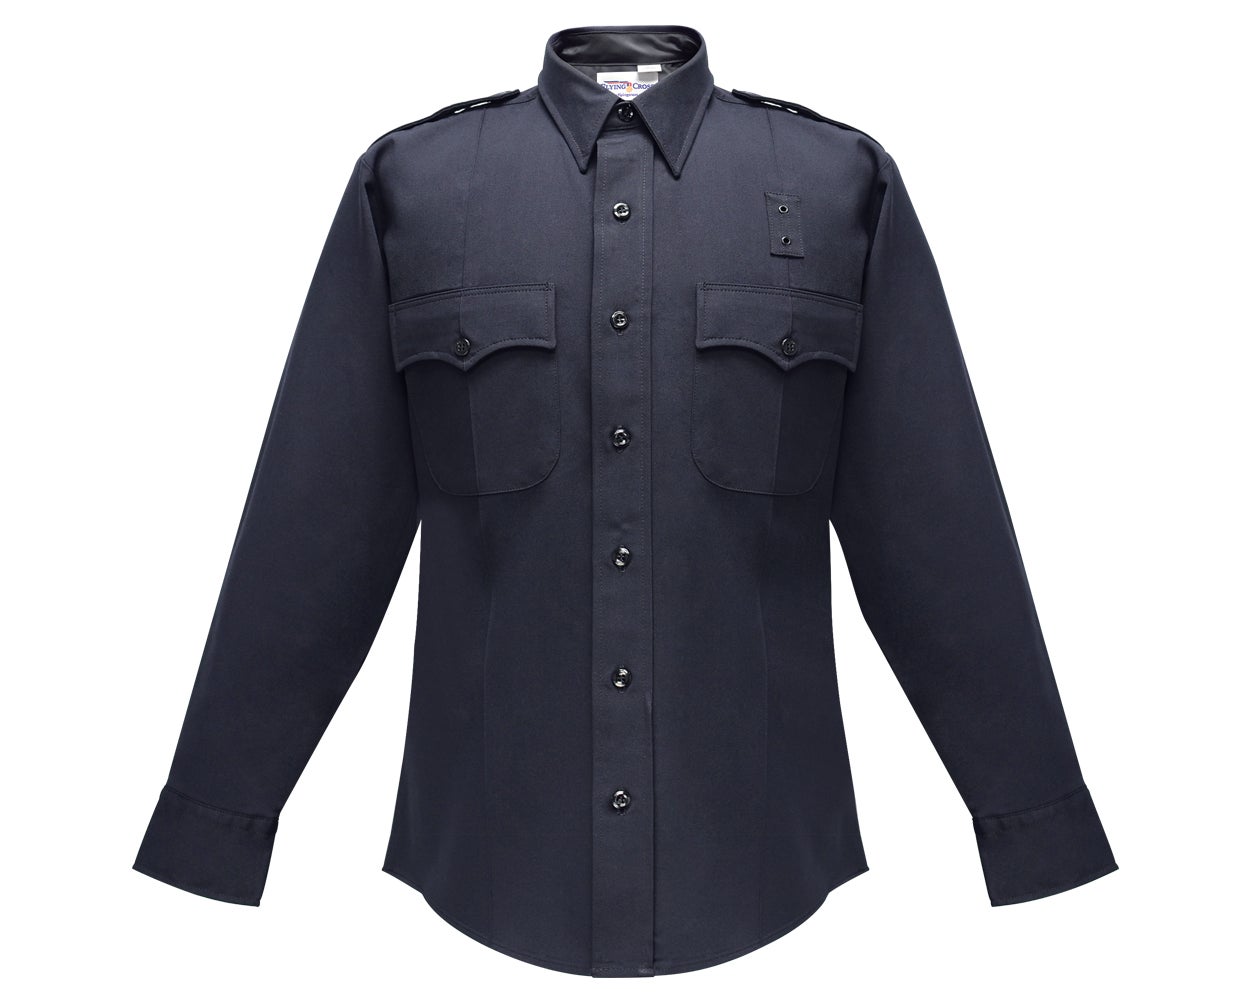 Flying Cross Deluxe Tactical 68% Poly/30% Rayon/2% Lycra Men's Long Sleeve Uniform Shirt with Com Ports - LAPD Navy 48W39 - Newest Products